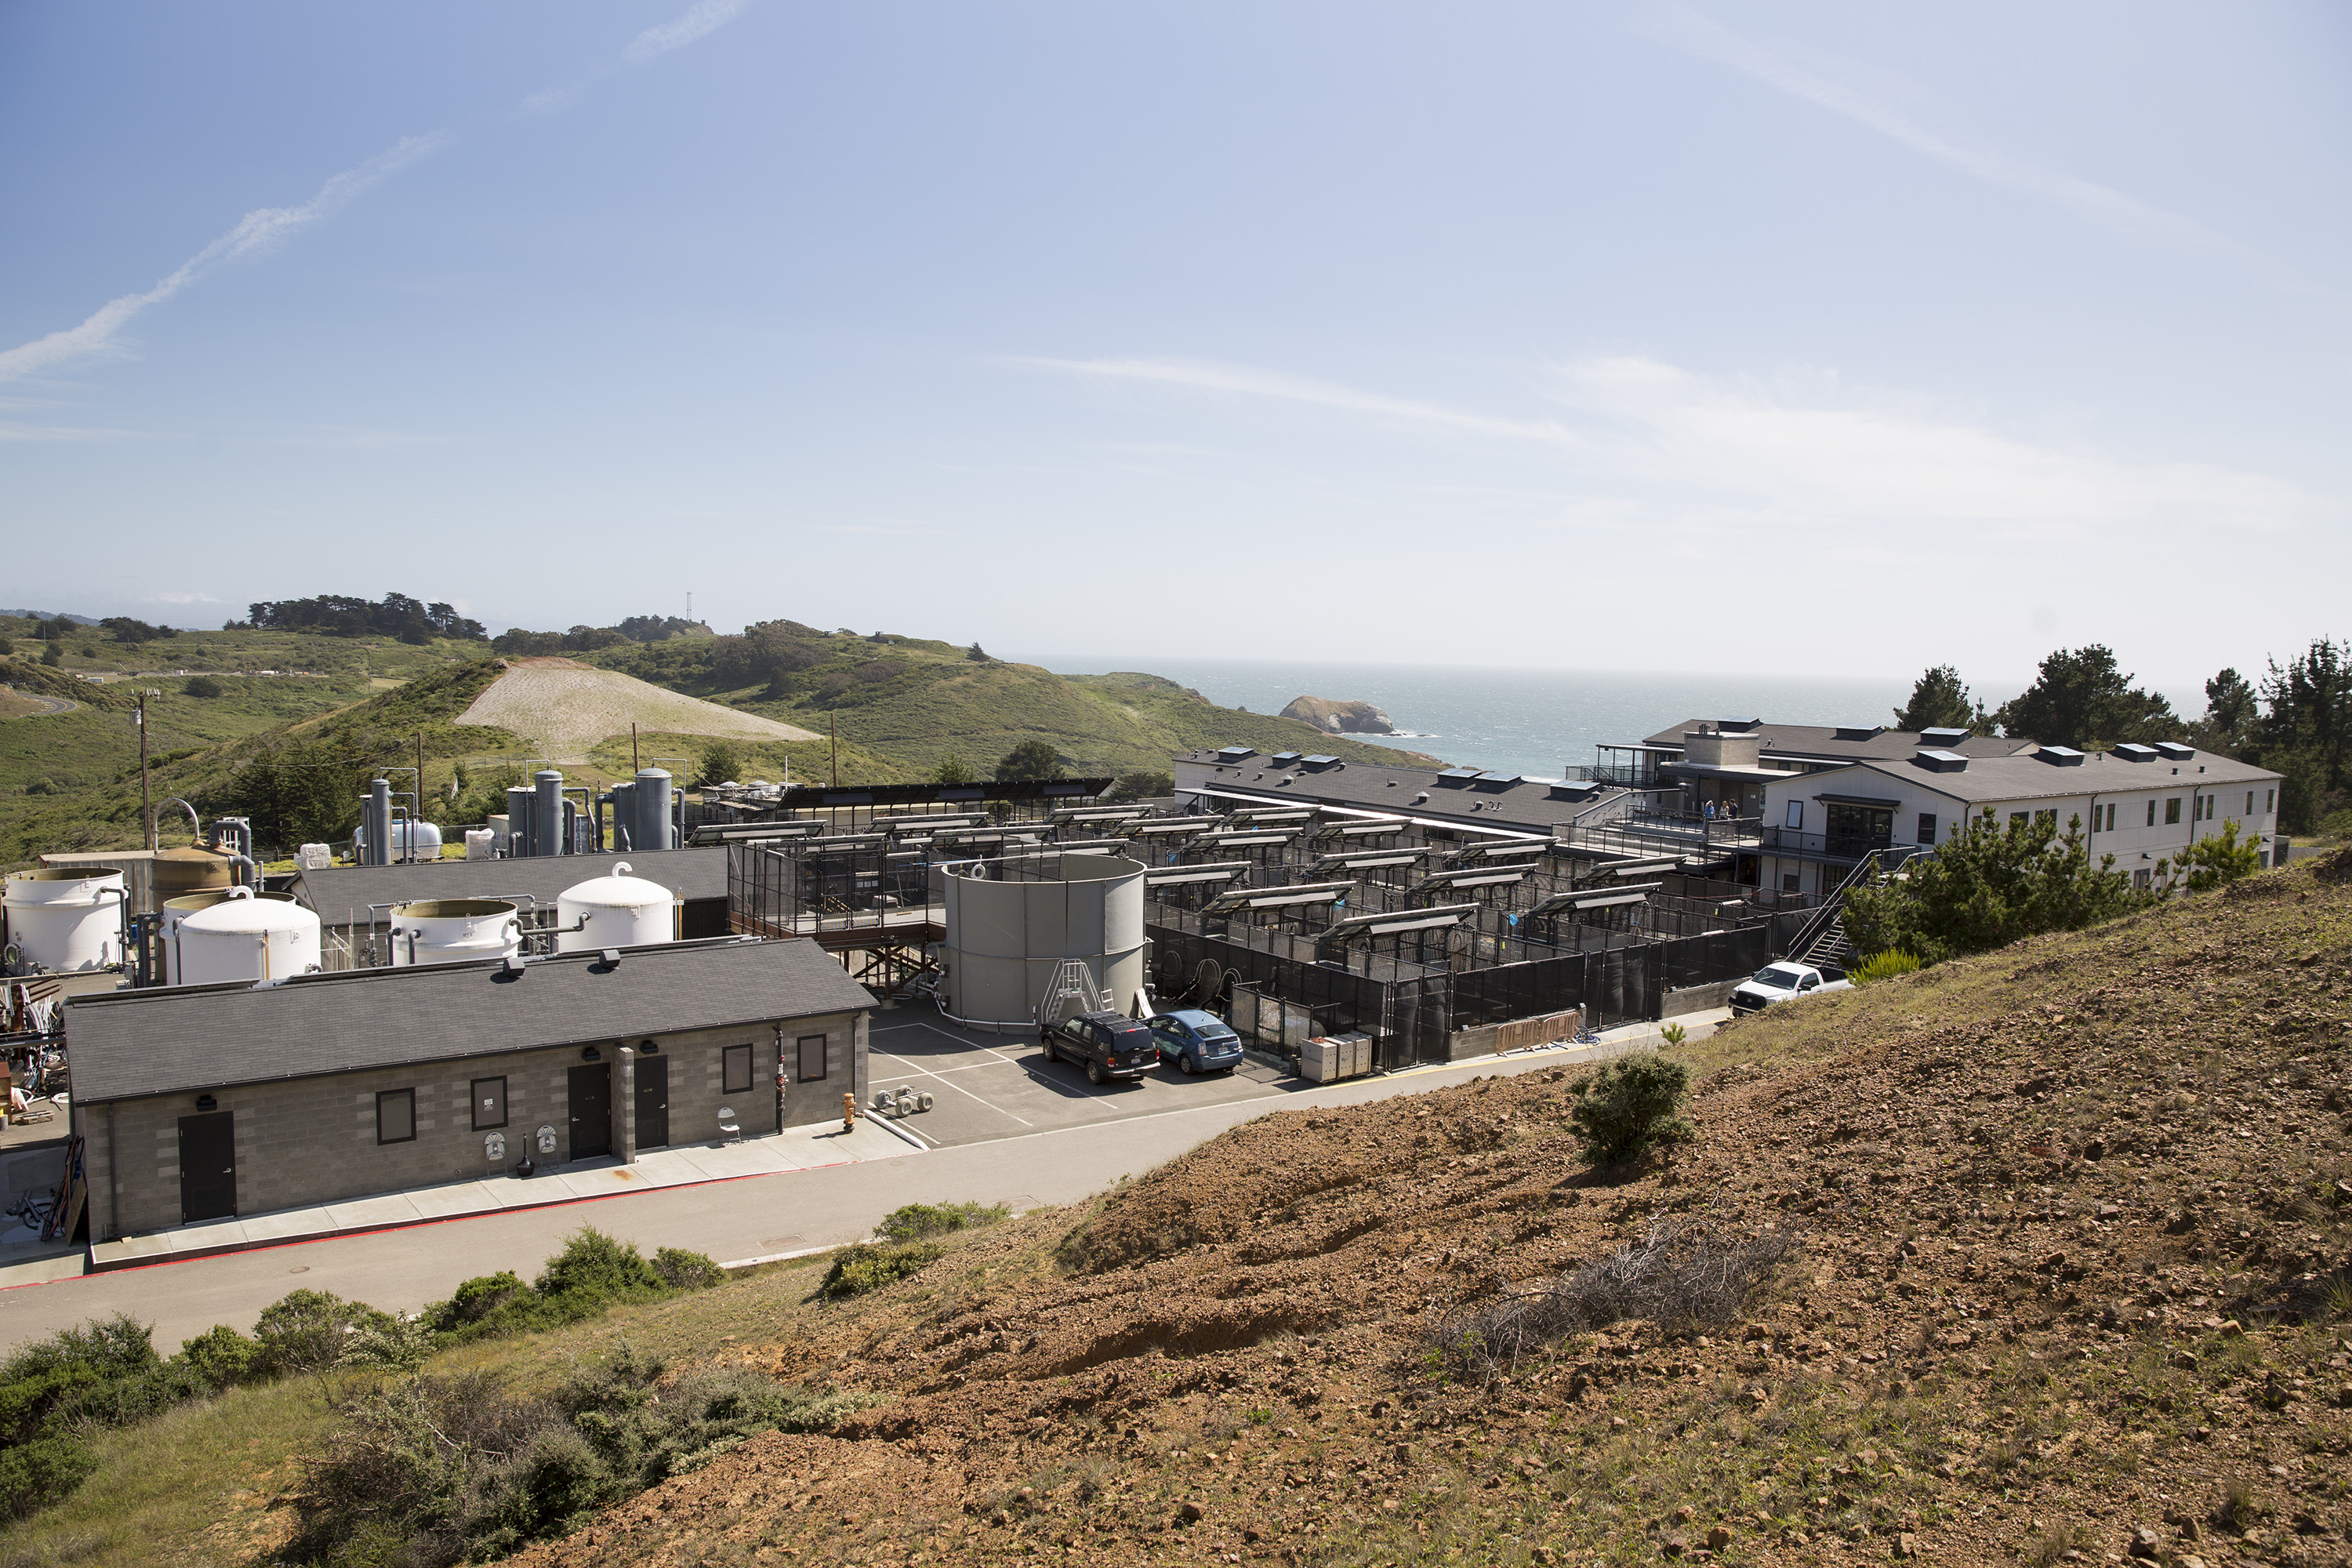 The Marine Mammal Center sits where the U.S. military once had a missile site outside San Francisco, in the Marin Headlands, Calif., May 9, 2014. (Photograph by Yuri Kozyrev—NOOR for TIME)